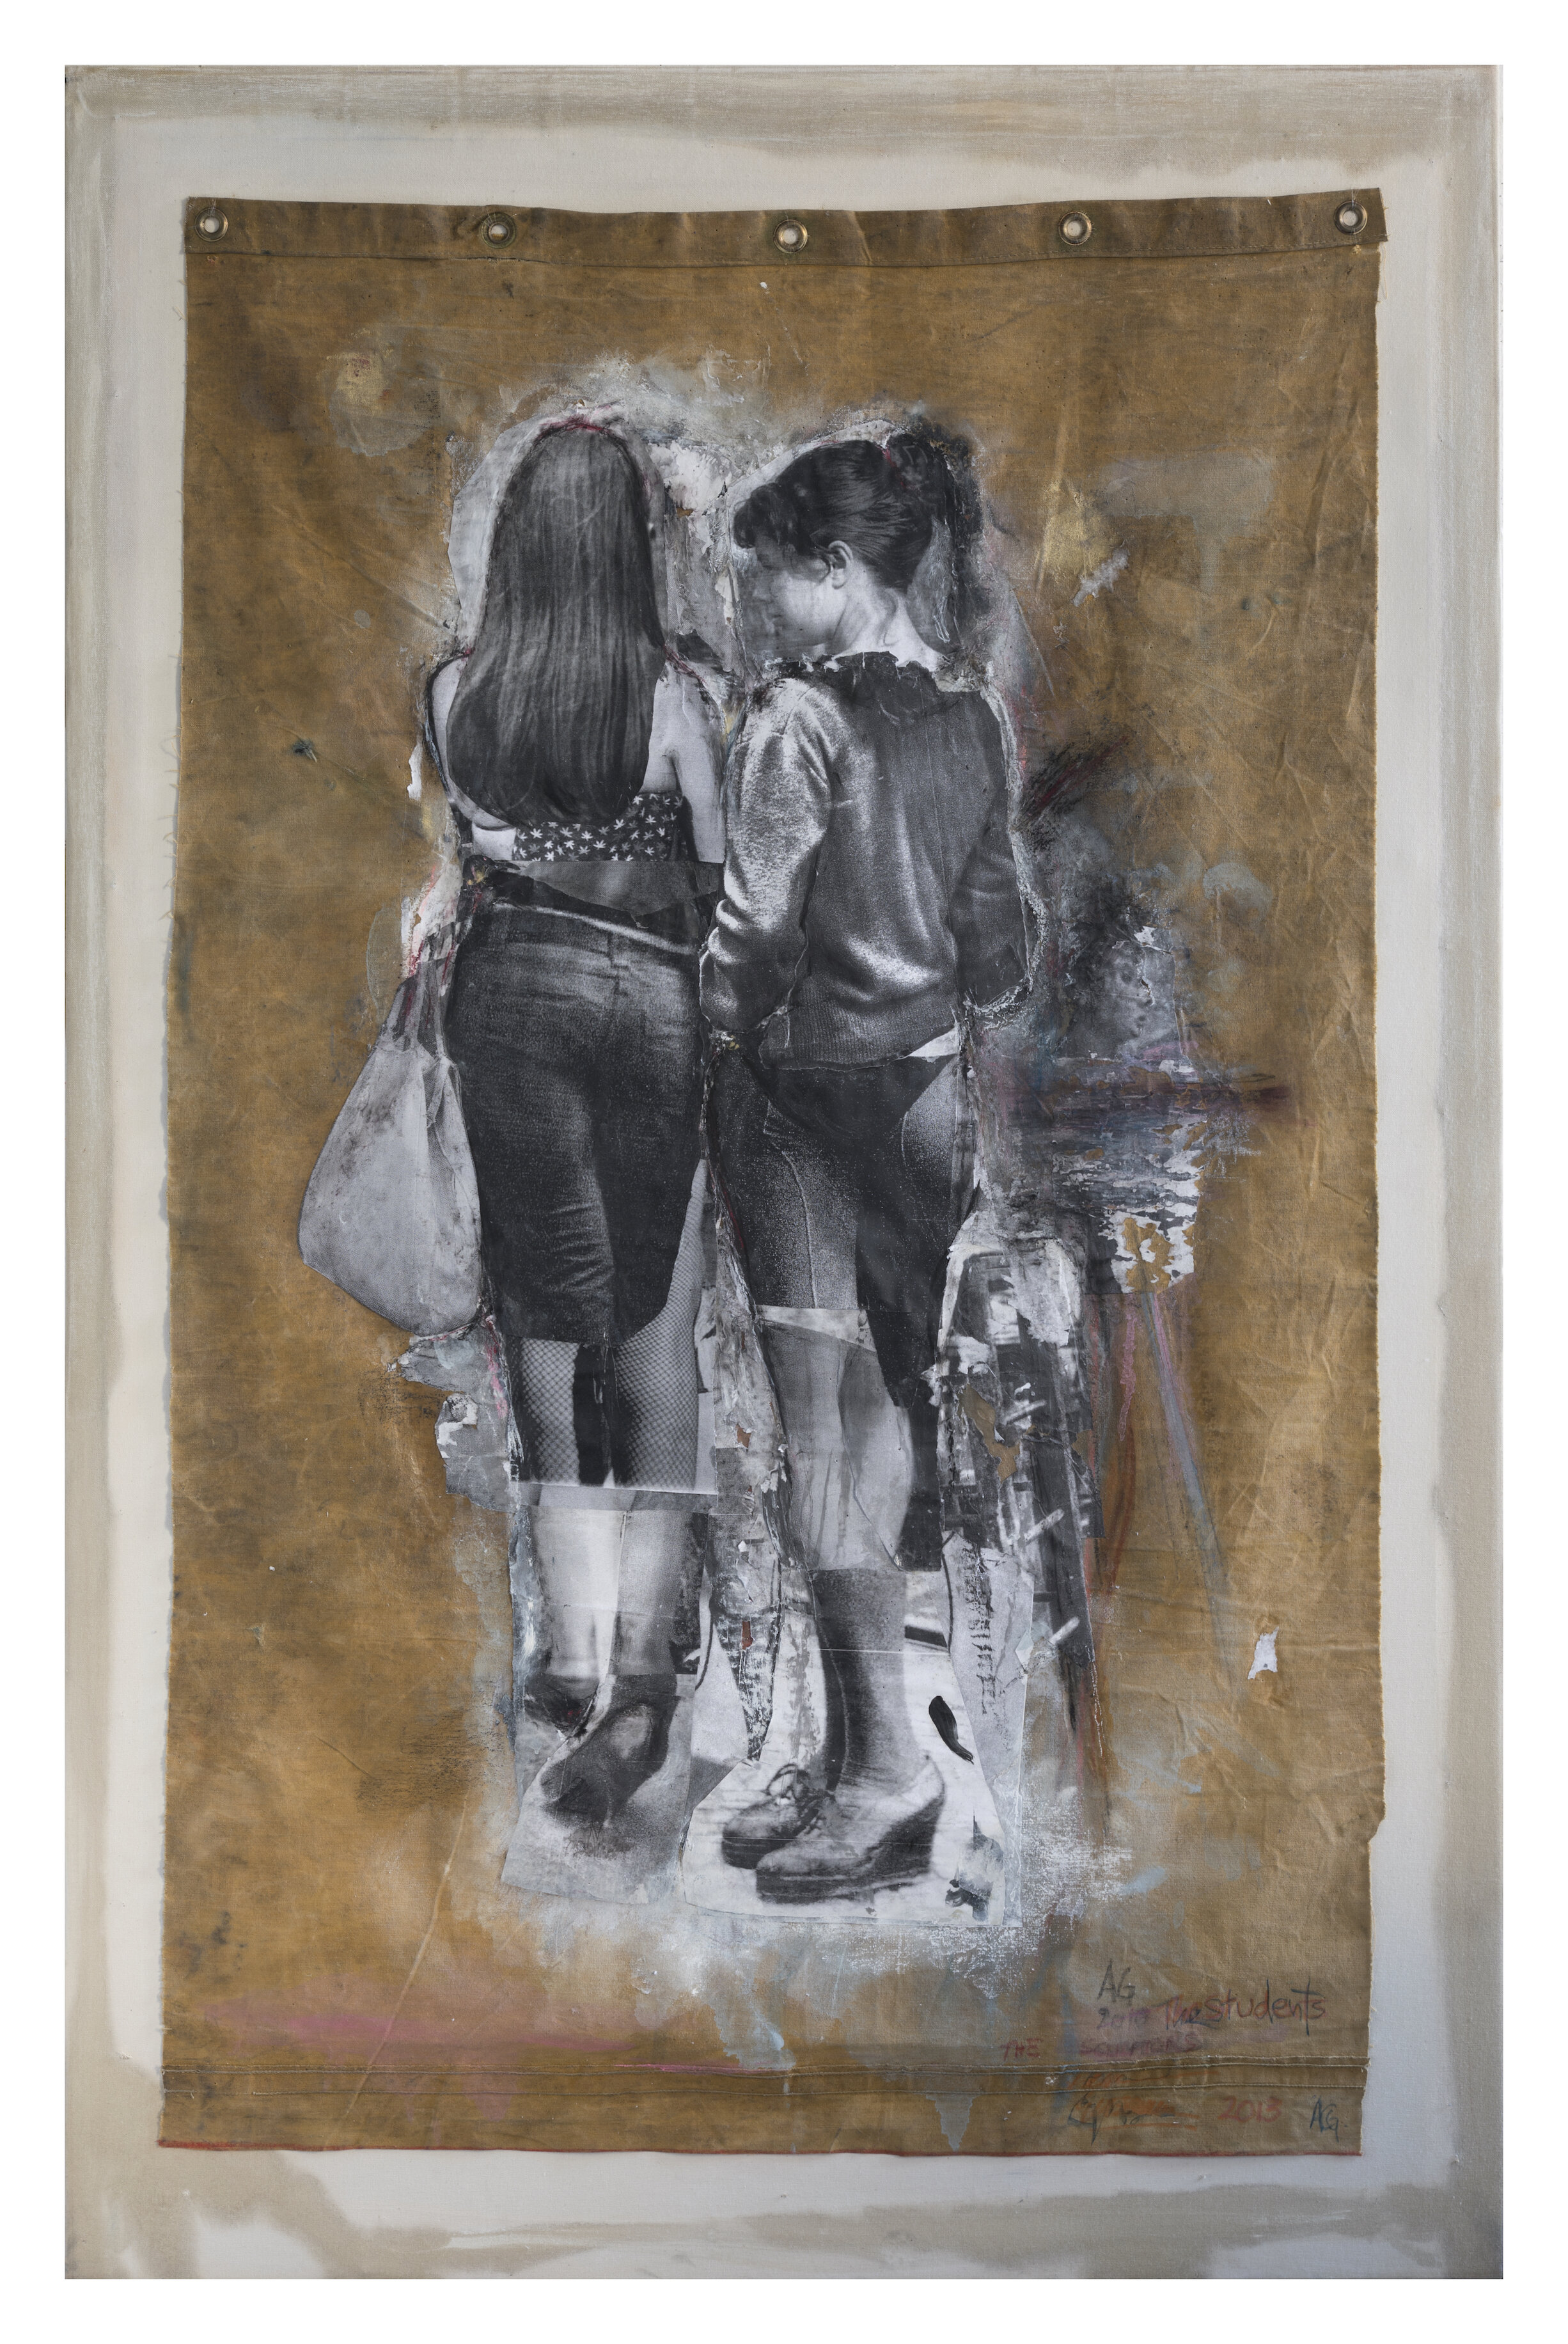  Angela Grossmann, Students, 2013, Collage on Vintage Tent Canvas, 66.25 x 42.25 inches 